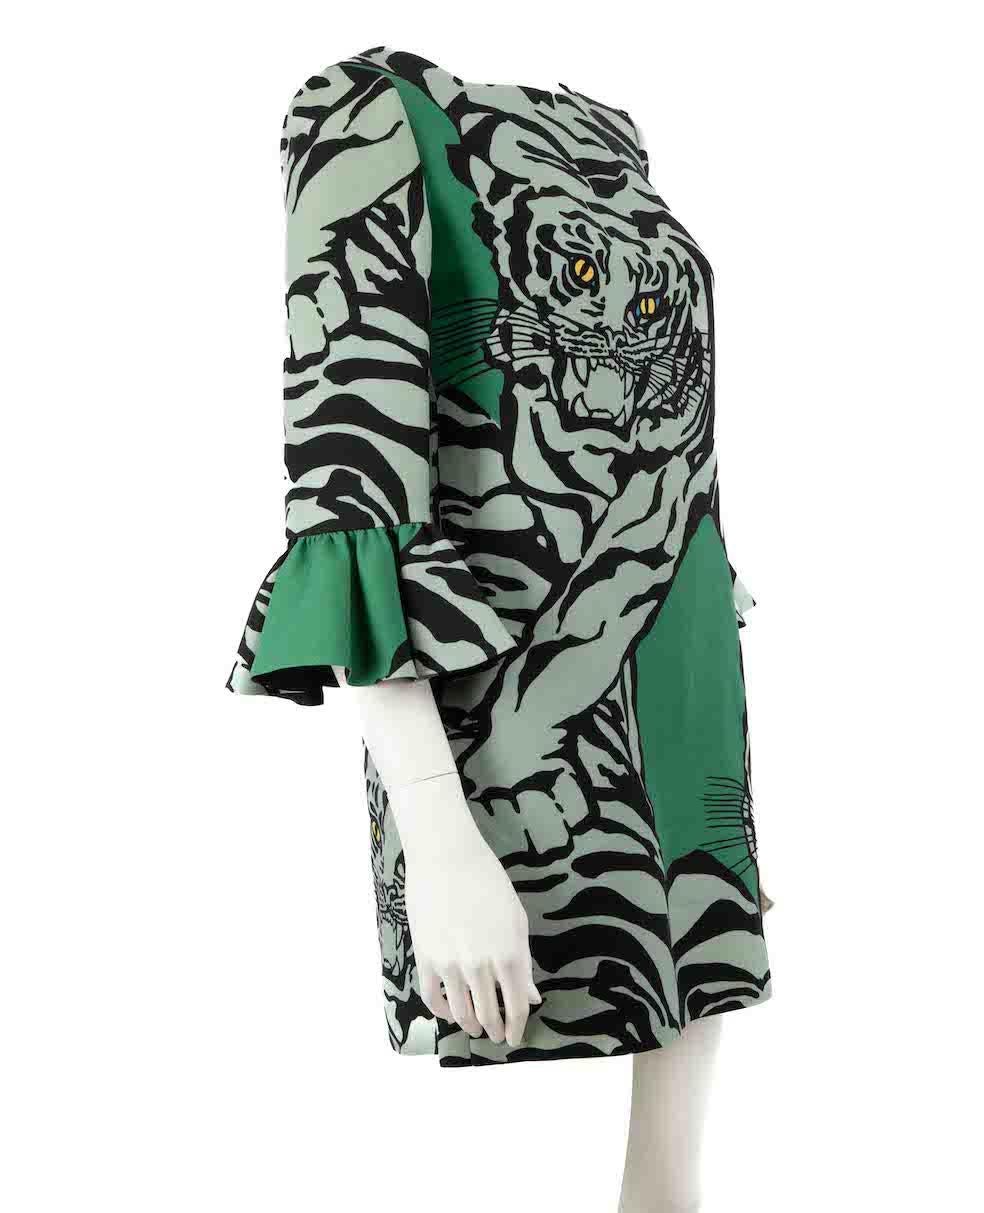 CONDITION is Very good. Minimal wear to dress is evident. Minimal wear to the brand label at the lining with two corners having become detached on this used Valentino designer resale item.
 
 Details
 1967 Re-Edition
 Green
 Wool
 Dress
 Tiger